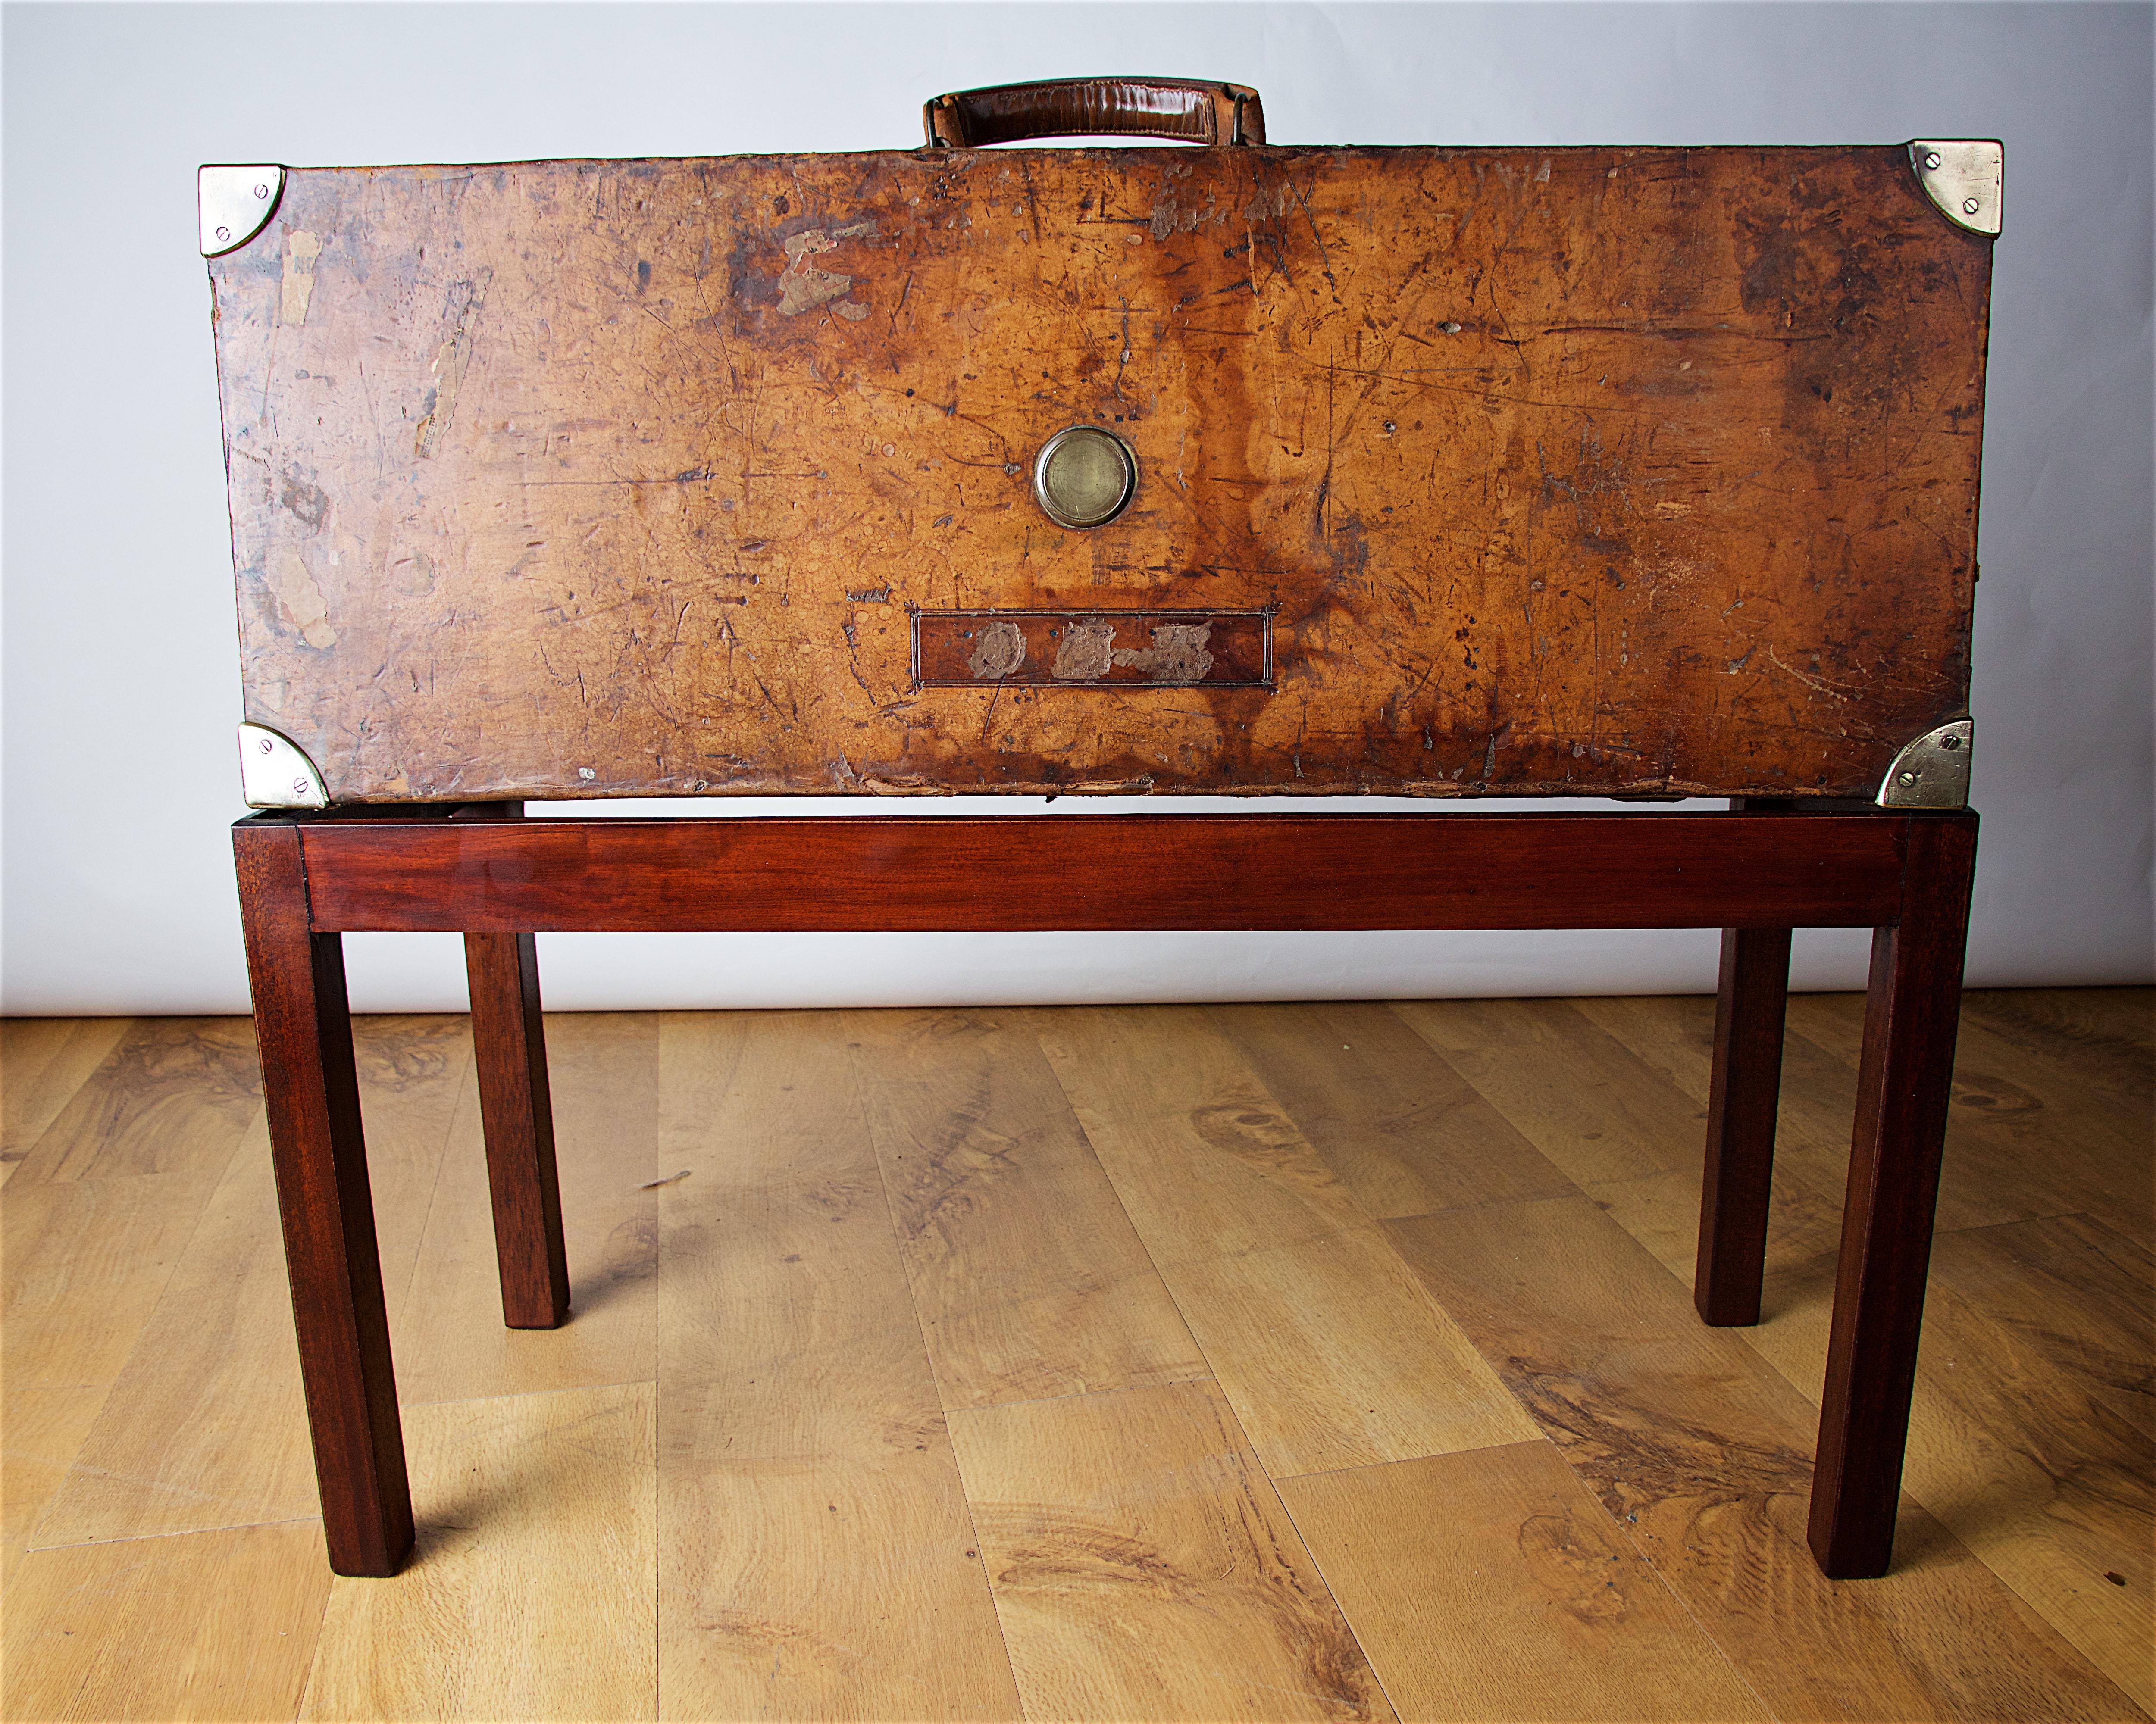 James Purdey & Sons, London, Leather, Oak and Brass-Mounted Gun Case 5